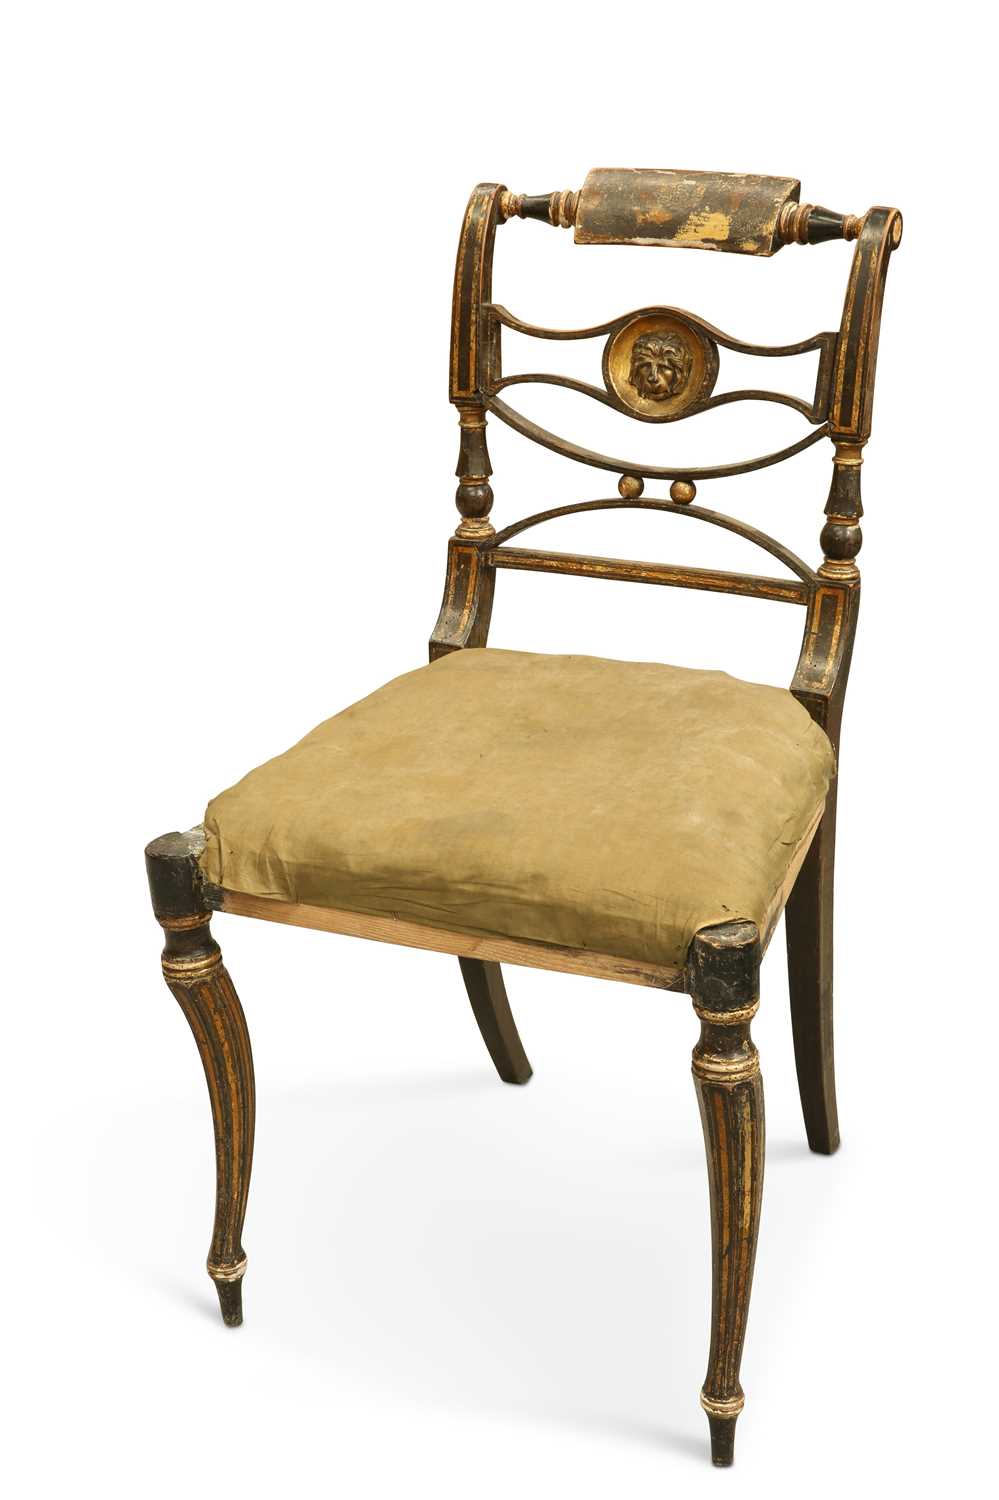 A REGENCY GILDED AND EBONISED SIDE CHAIR, IN THE MANNER OF THOMAS HOPE